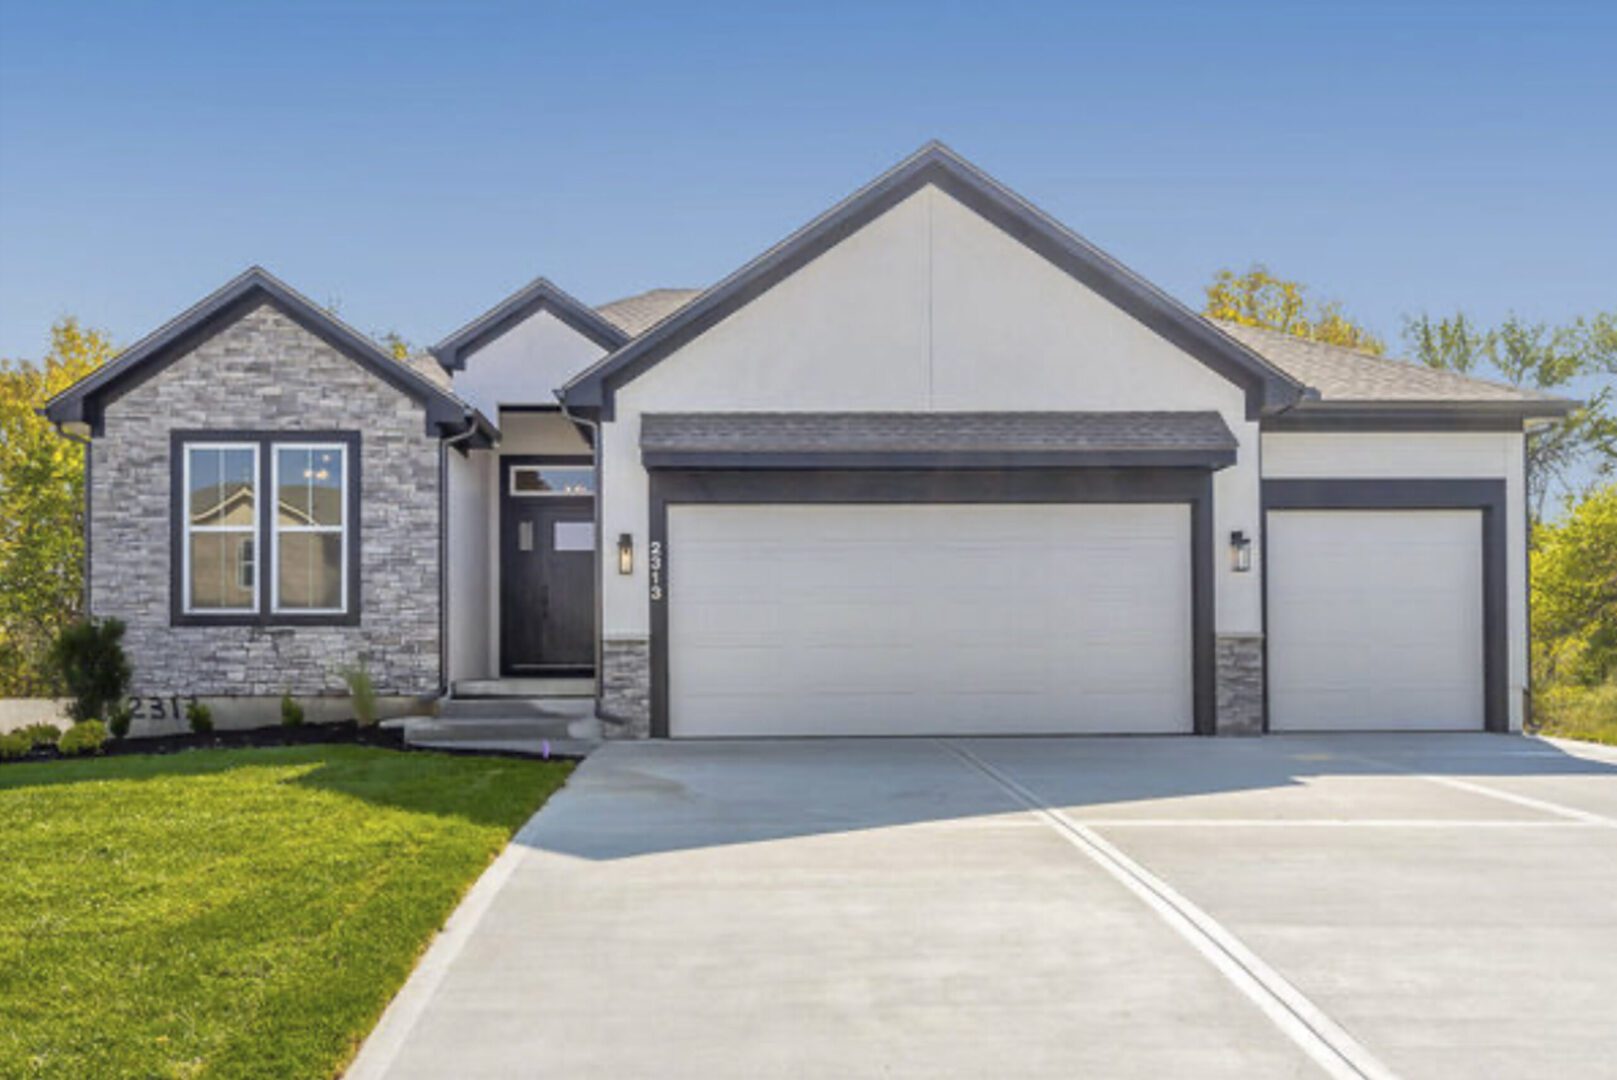 A home with two garages and a driveway.